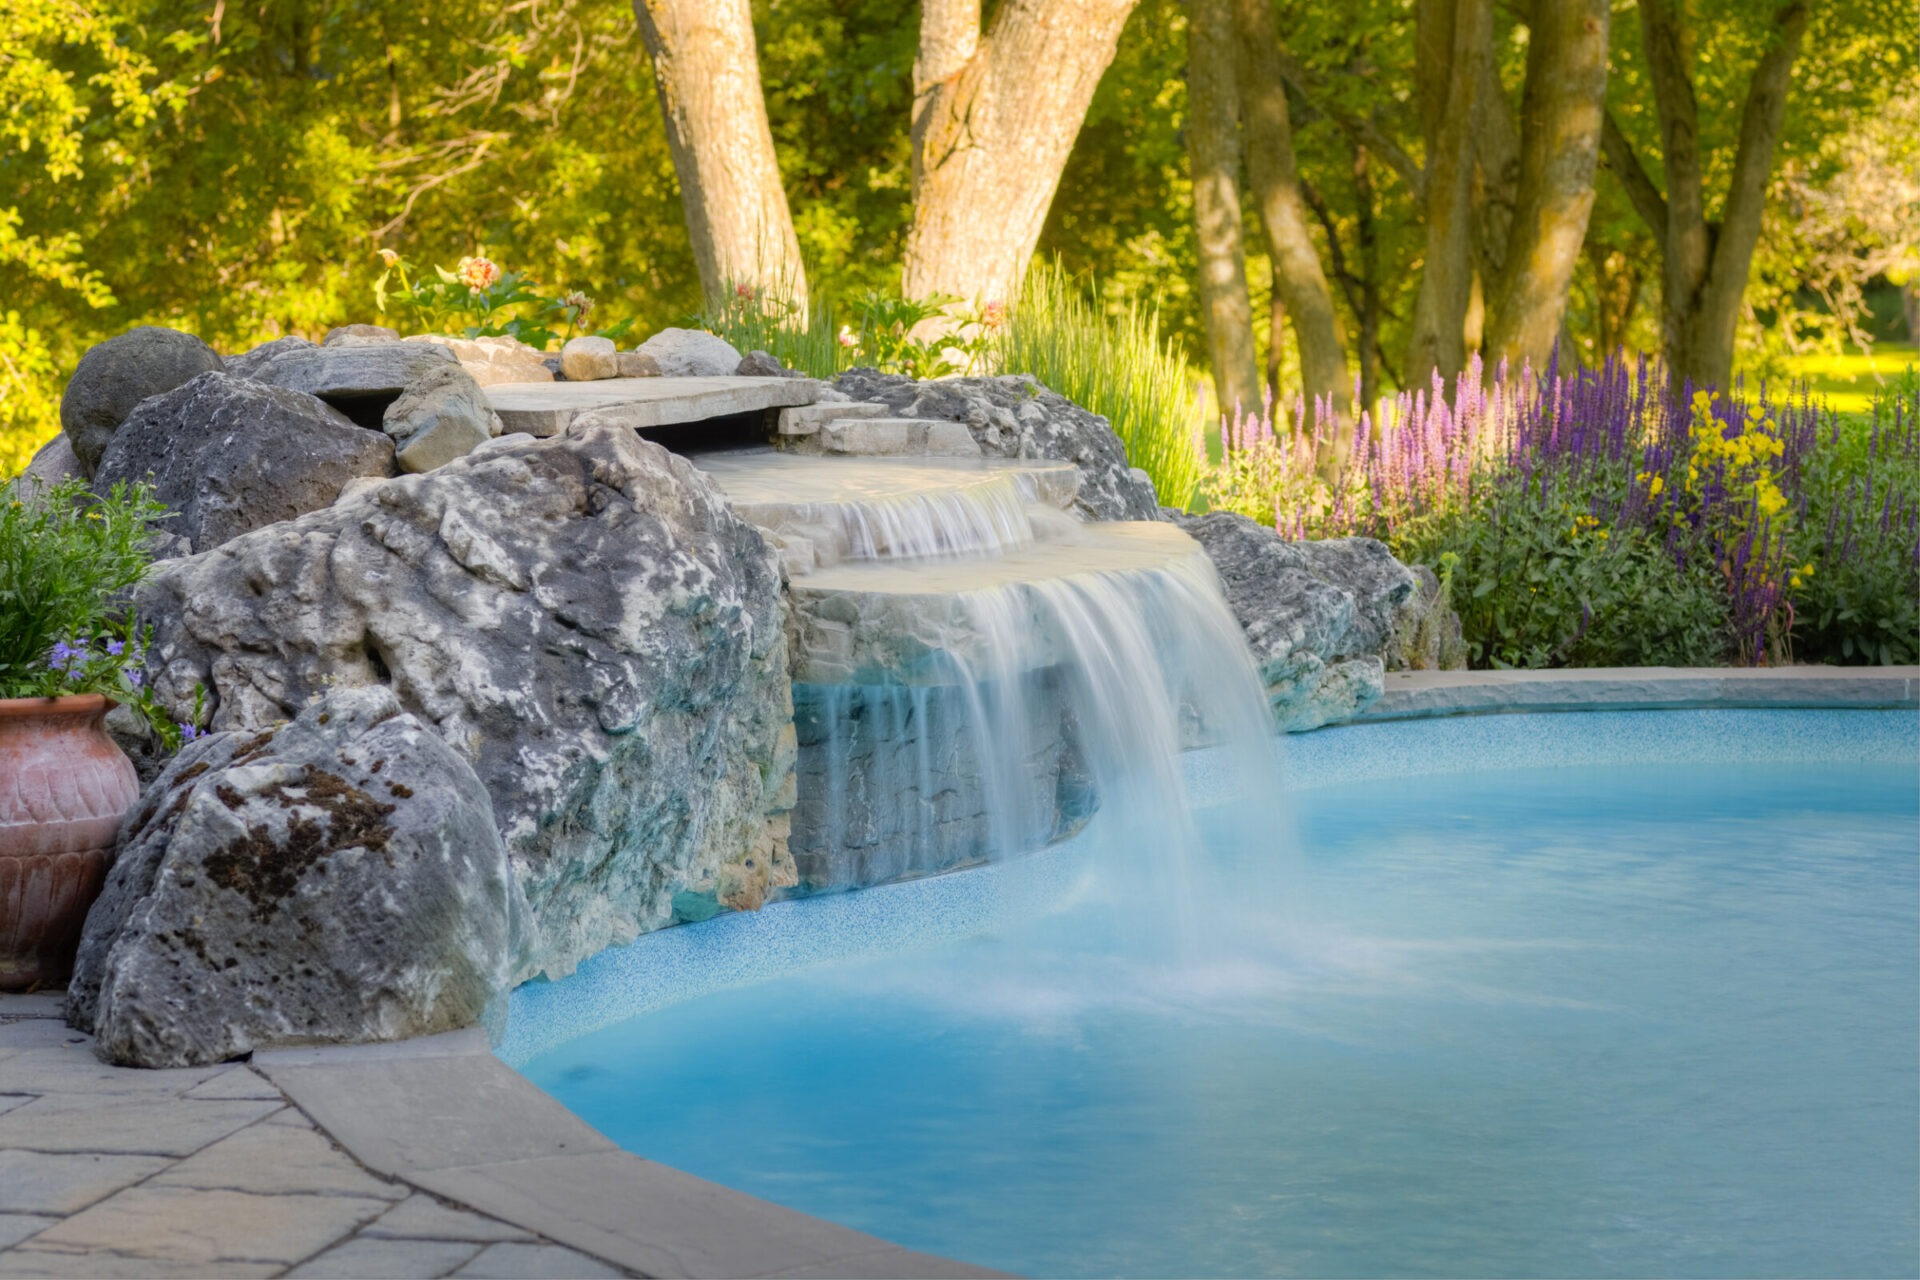 An artificial waterfall flows into a serene blue pool surrounded by lush greenery, purple flowers, large rocks, and a tranquil natural setting.